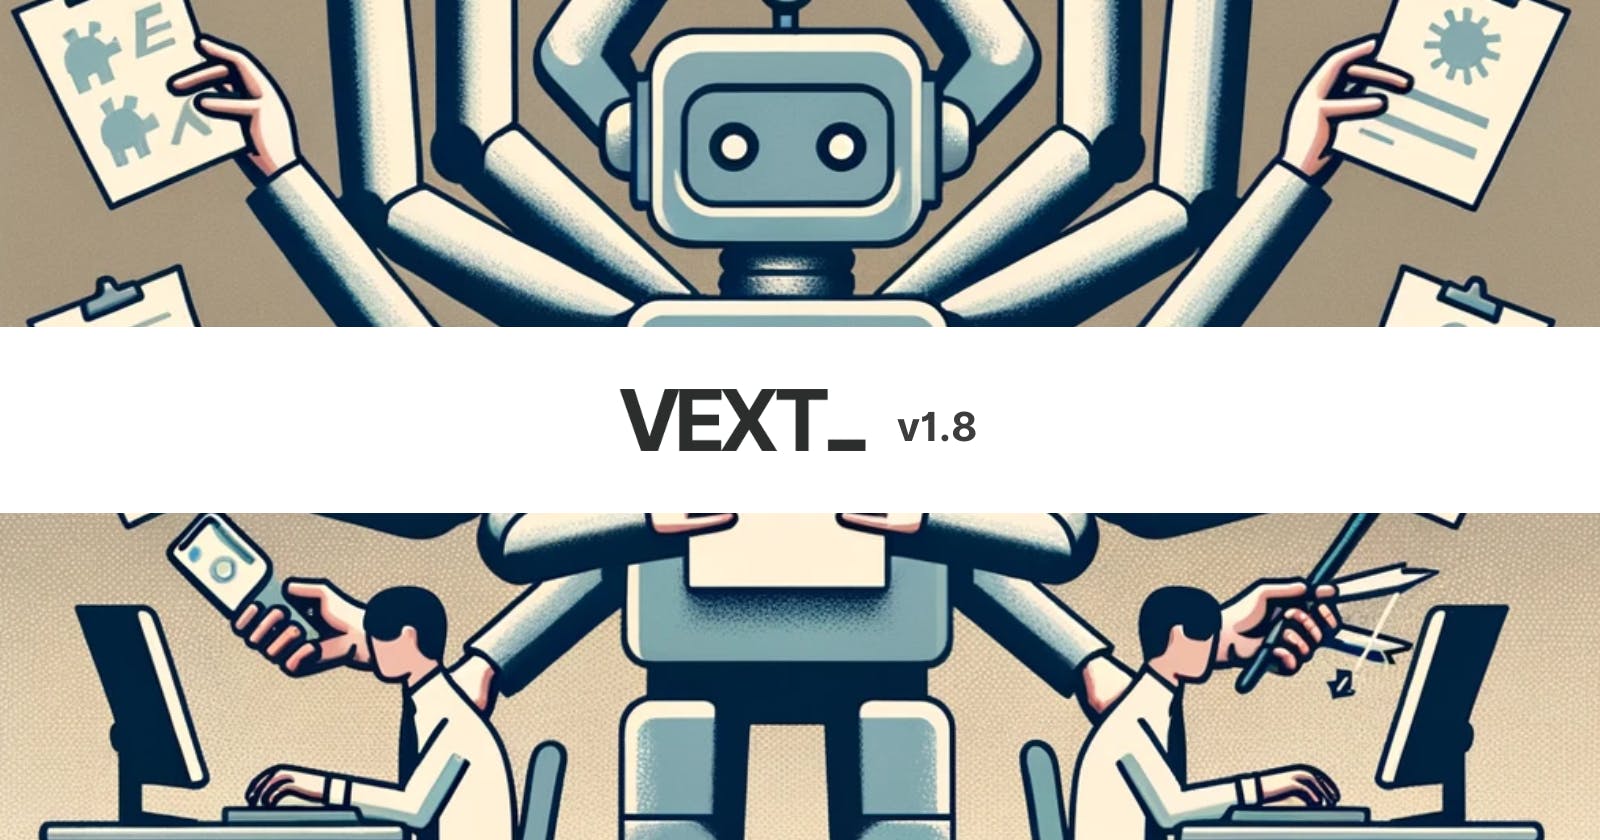 Vext v1.8: System Prompt Variables, Discord Integration, Claude 3 Opus